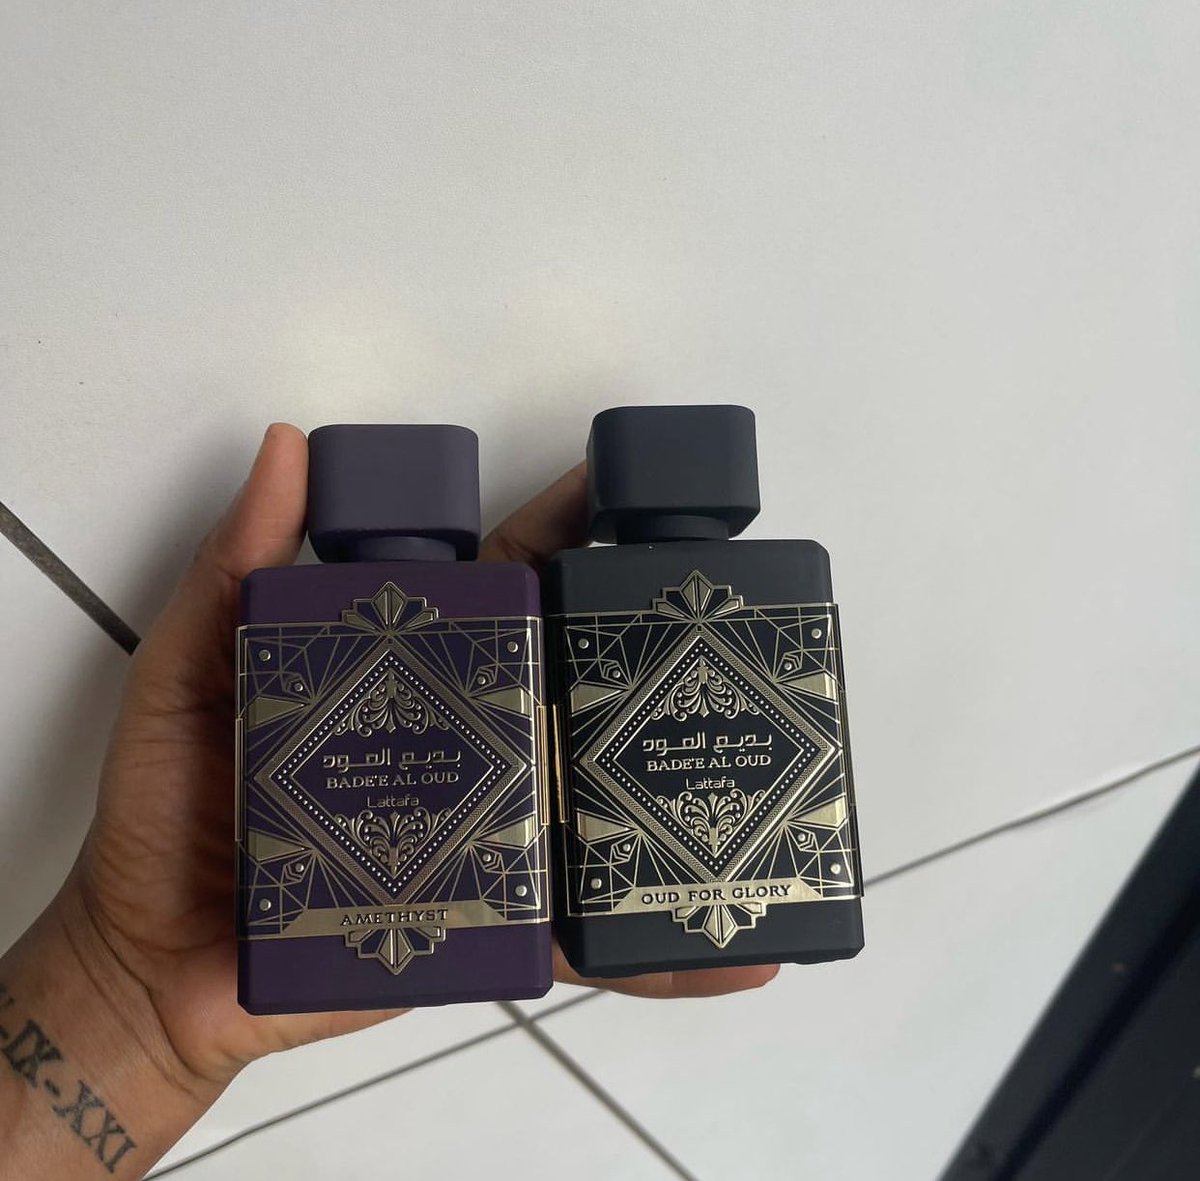 You will beg the frangrance to leave your body🥲
15,000 naira only
For oud lovers🛍🛍

AMVCA Shettima Chelsea At 22 John Wick Google Docs Innoson Casemiro Asake Leicester Bola Ahmed Tinubu #Bitcoin #instagramdown